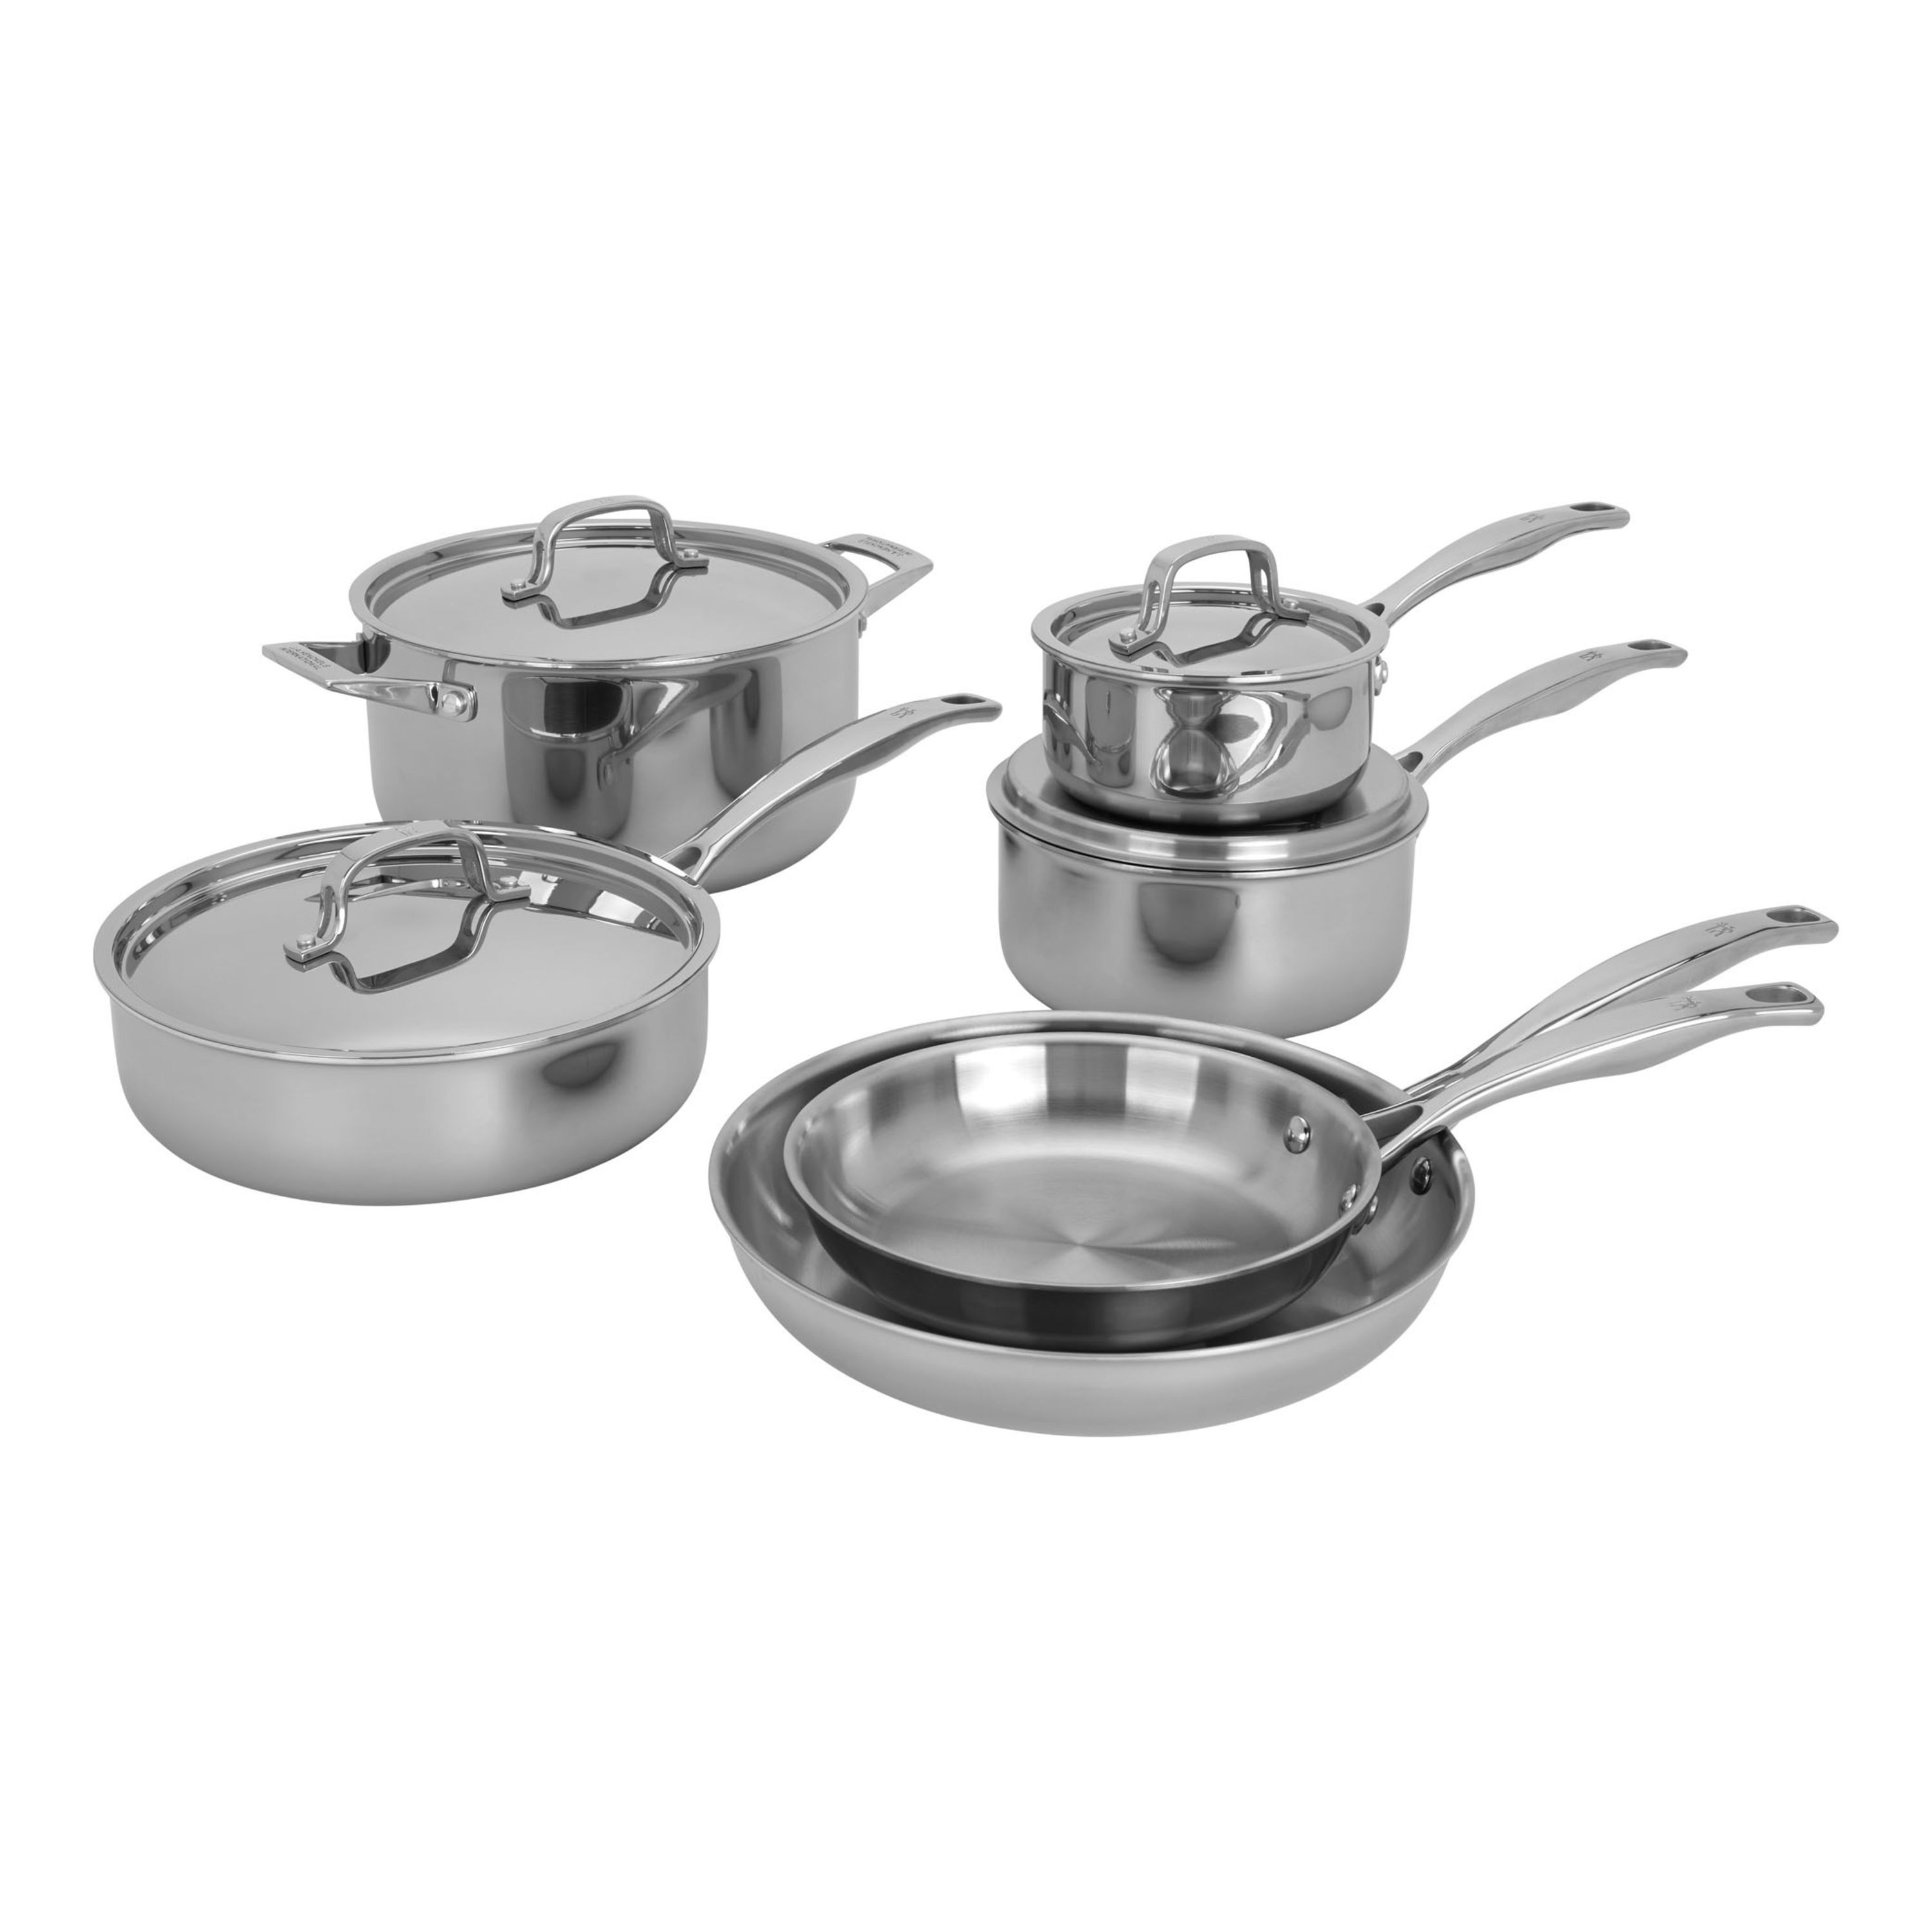 Zwilling Focus 66670-000-0 5-Piece Saucepan Set Glass Lids Suitable for Induction Cookers Rust-Free 18/10 Stainless Steel 